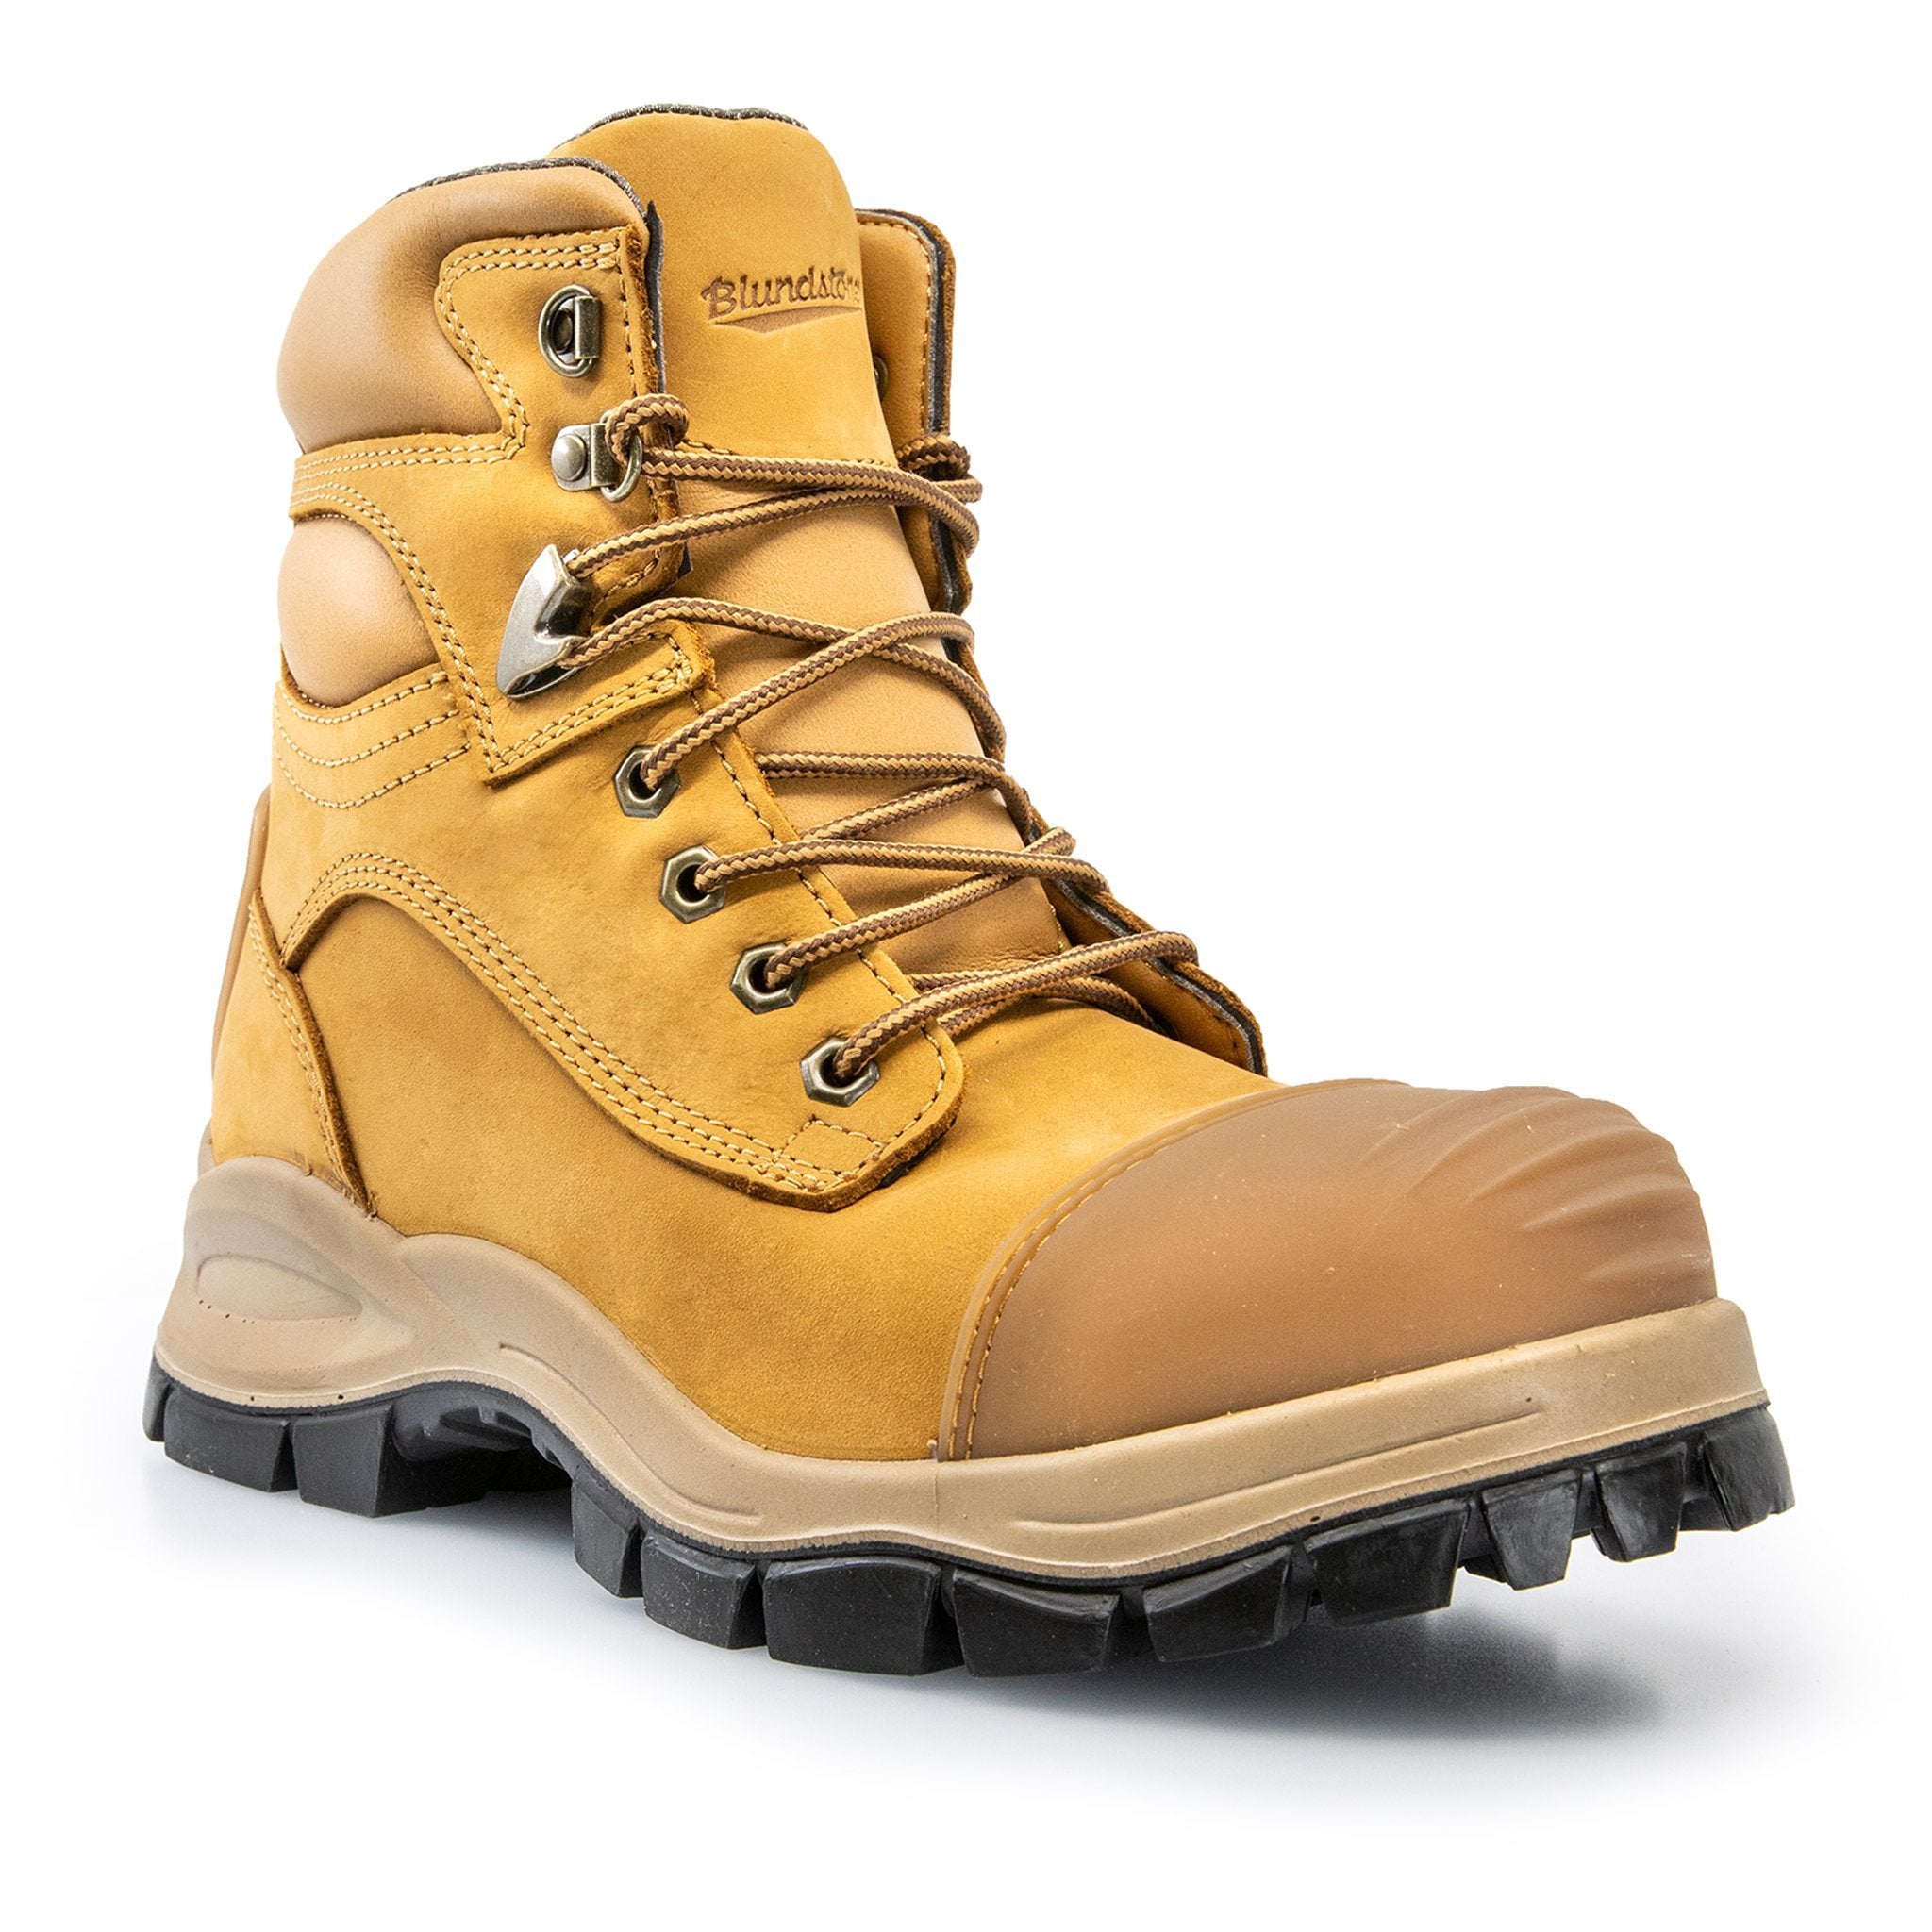 WORK BOOTS FOR MEN WITH